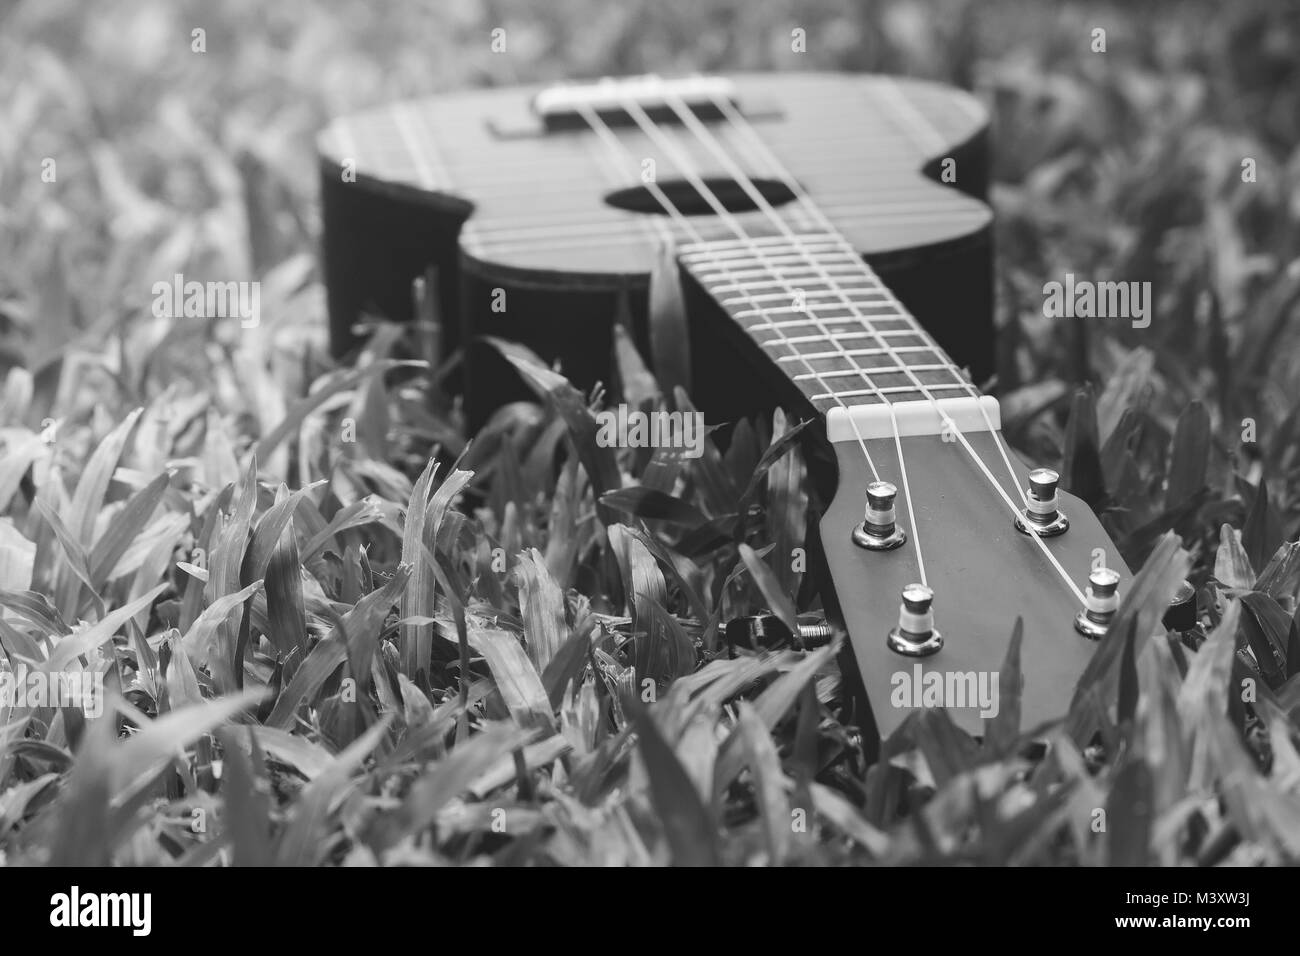 Abstract black and white image close up of musical instrument ukulele guitar on green grass. Stock Photo